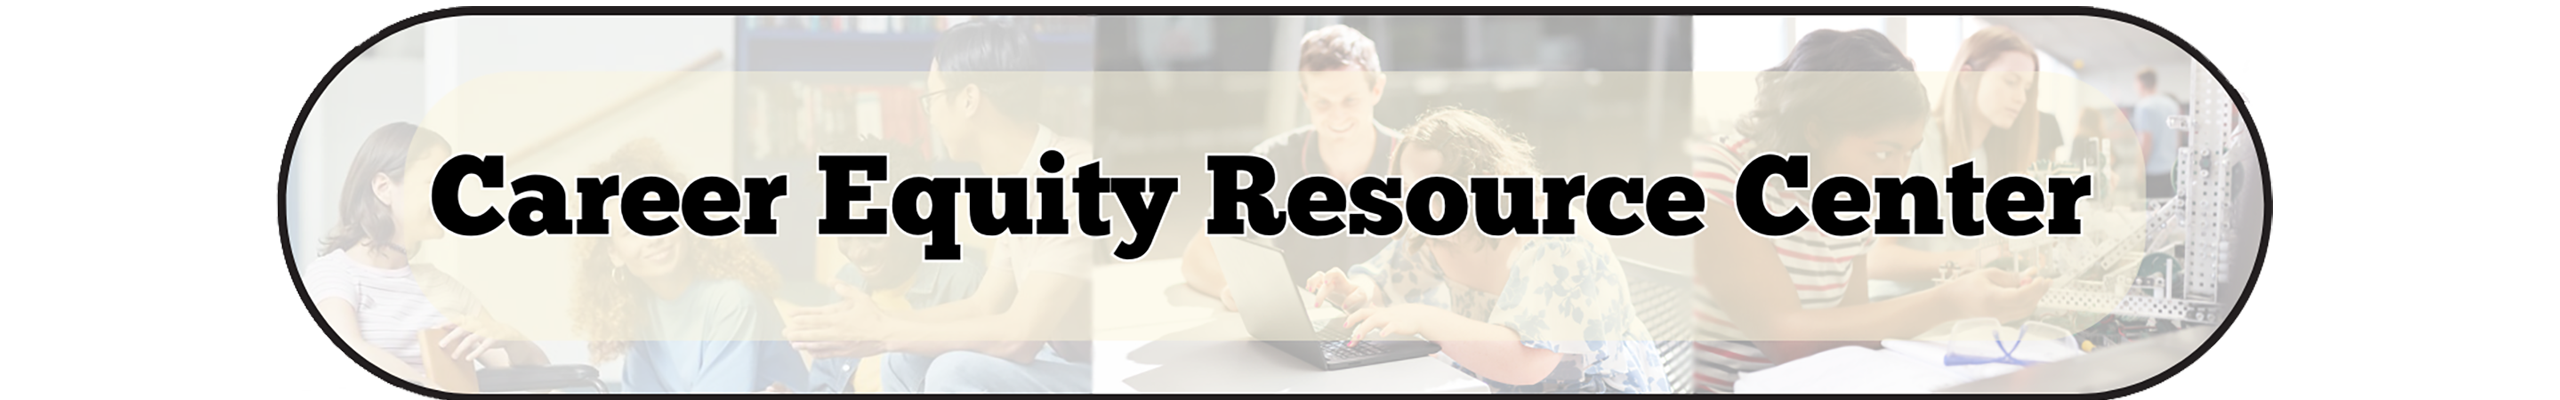 Career Equity Resource Center